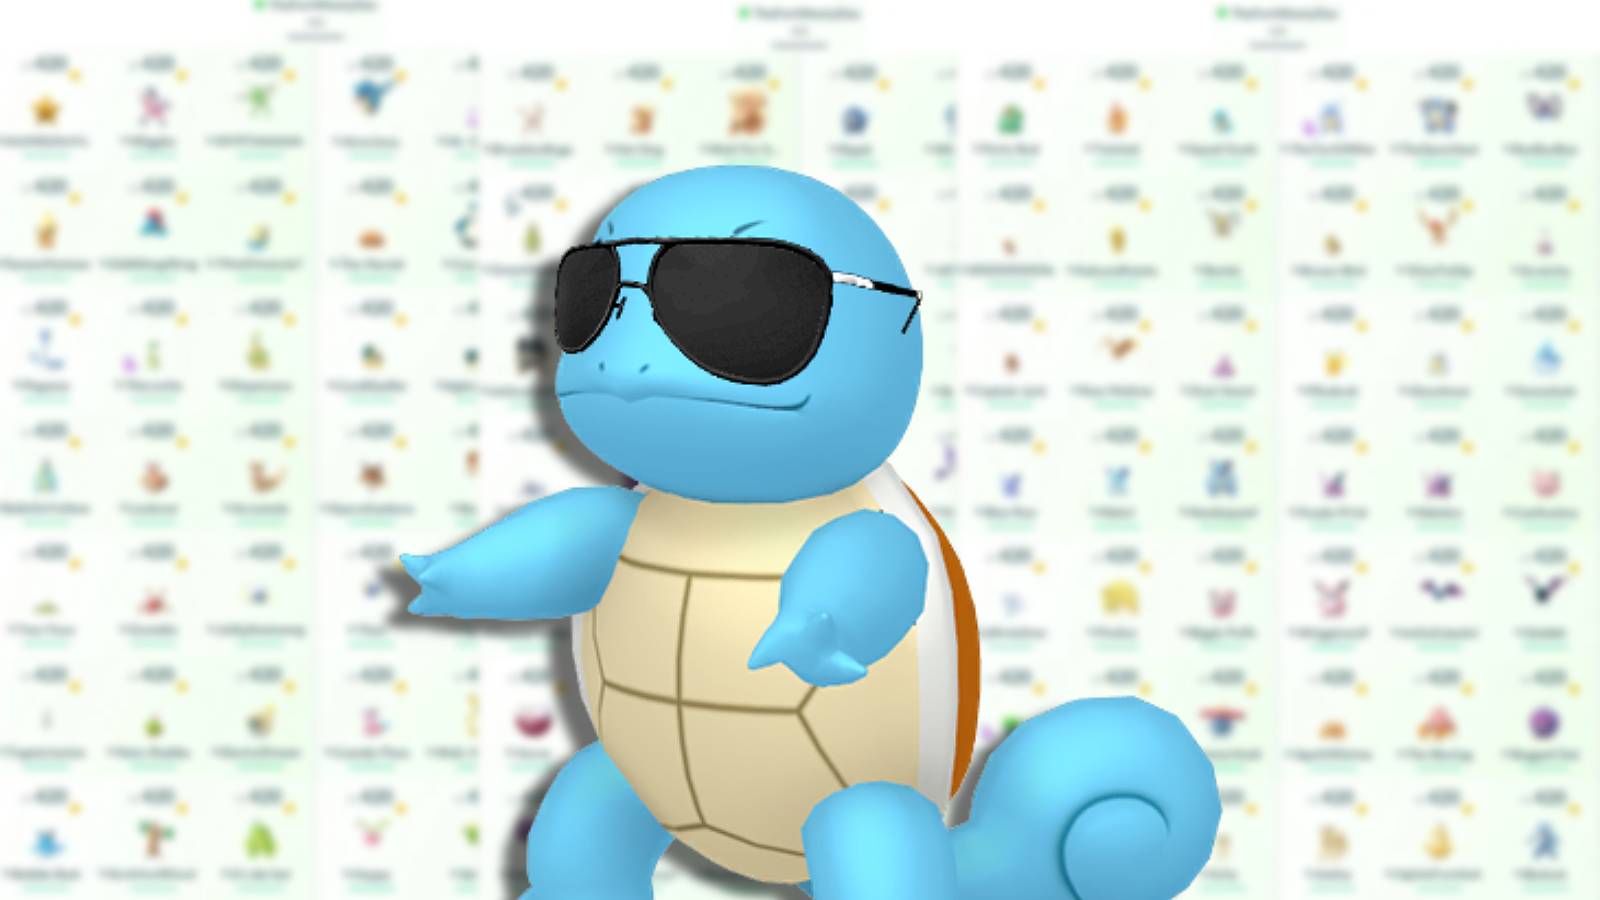 A Squirtle with sunglasses appears against a vast collection of Pokemon